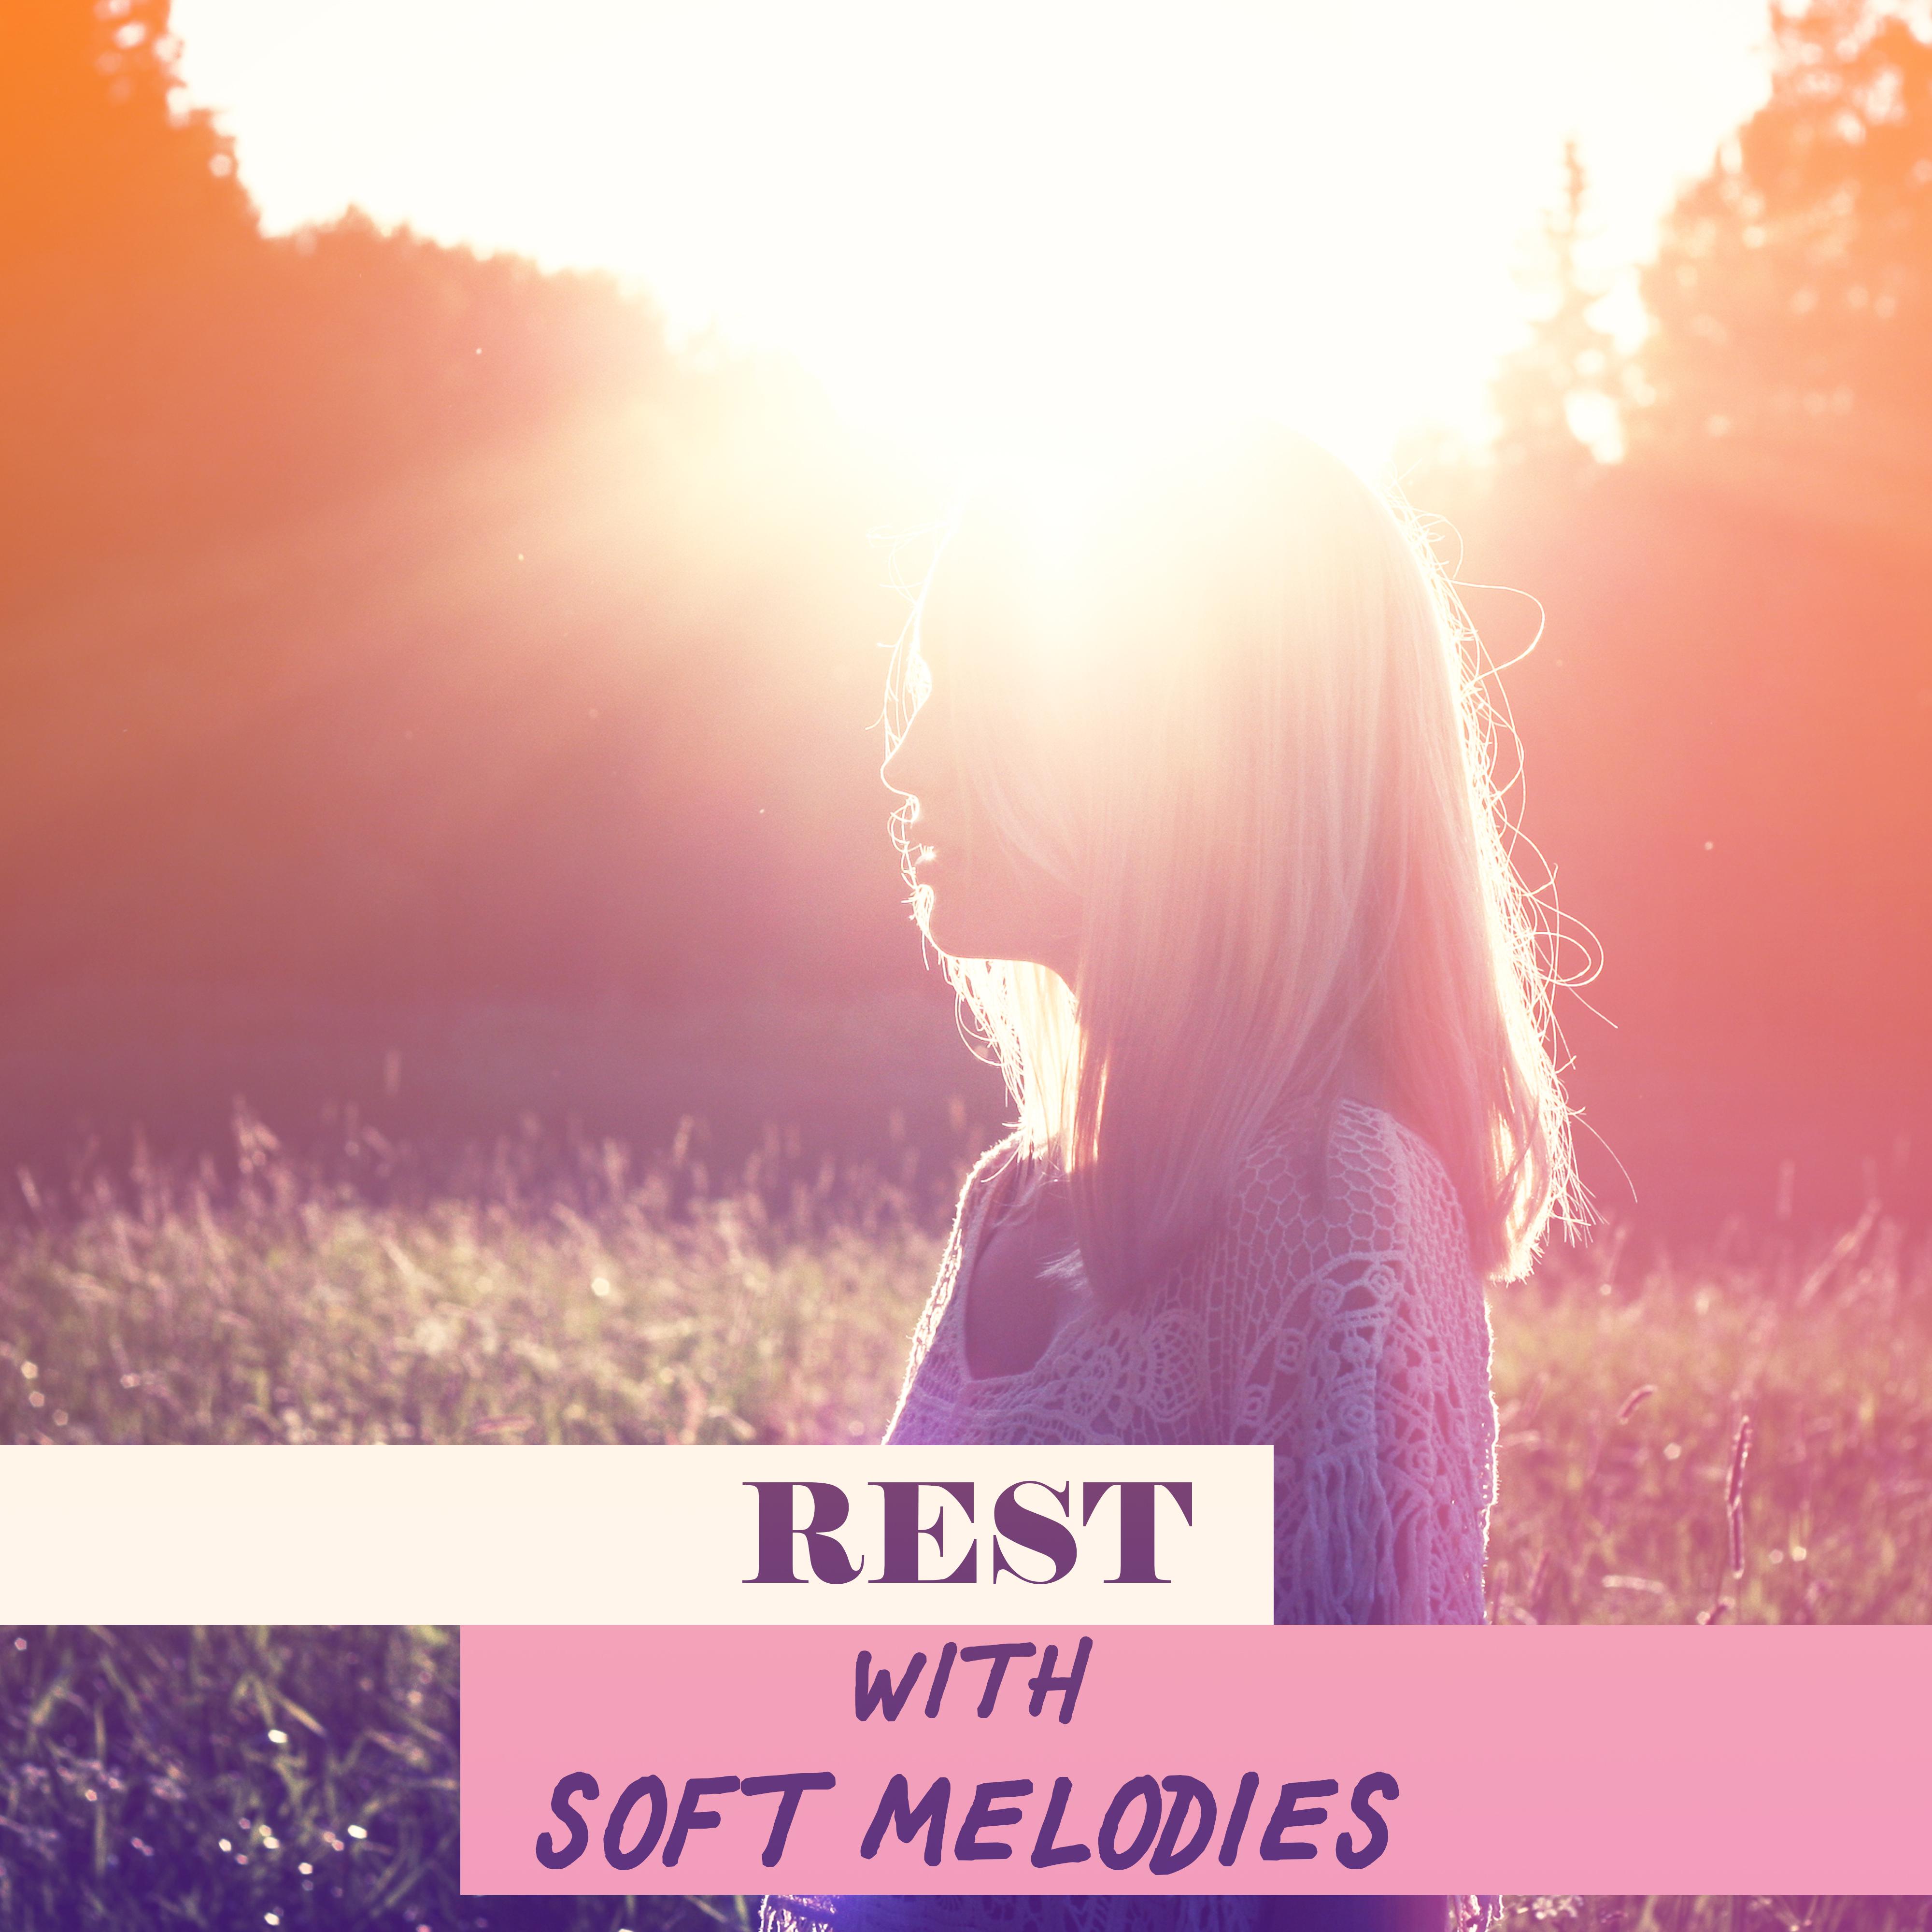 Rest with Soft Melodies